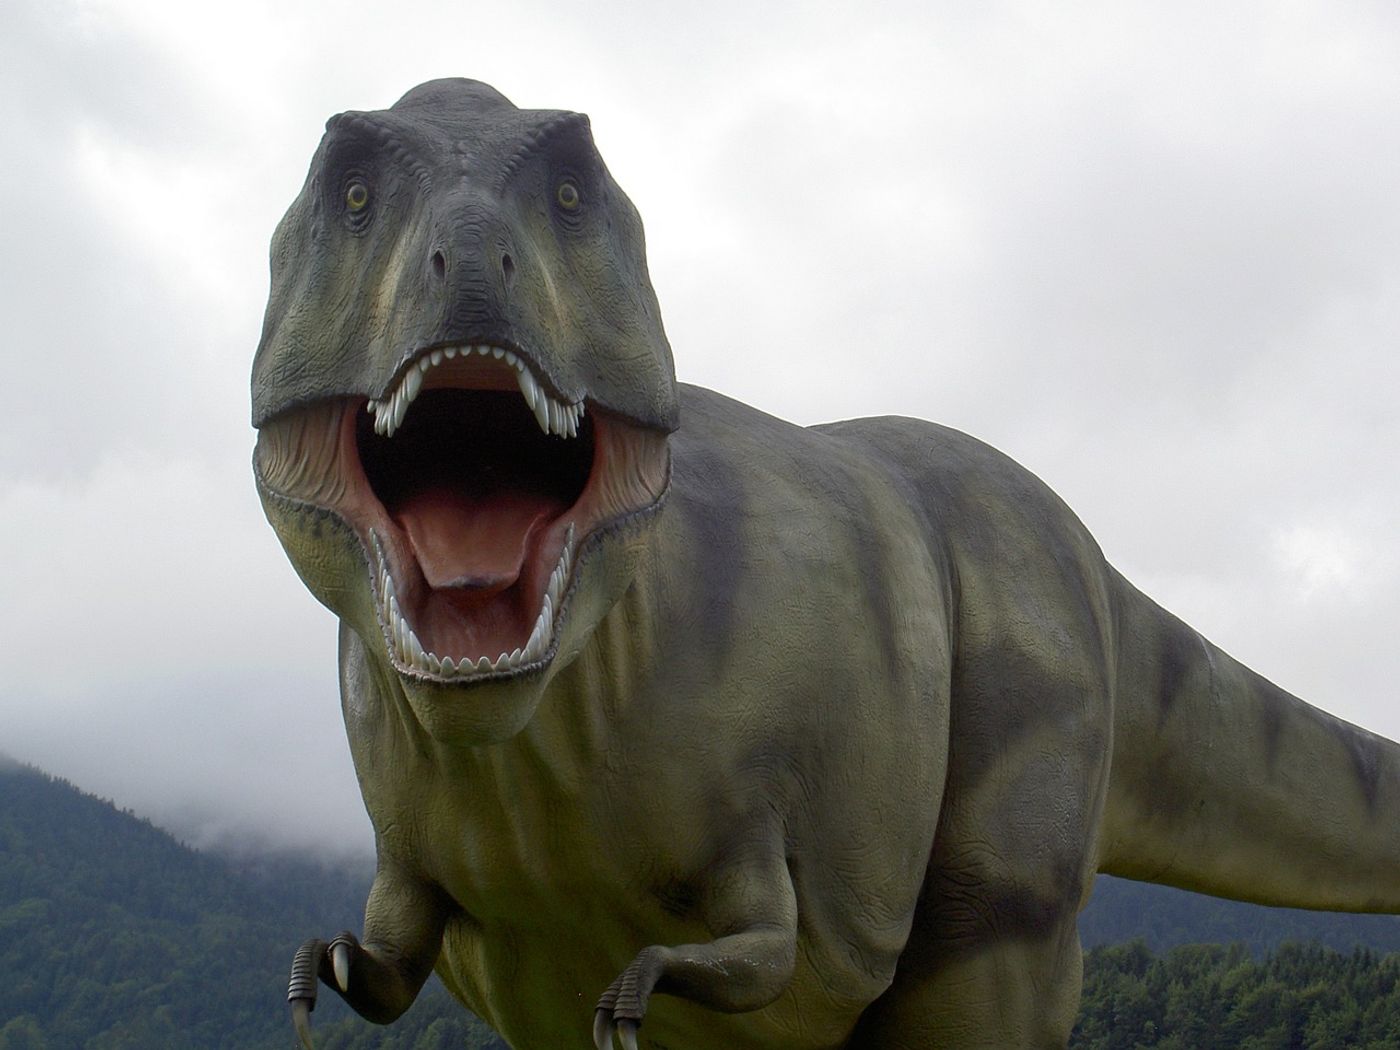 Chances are, you're pretty familiar with the T. Rex. But how much do you really know about them?